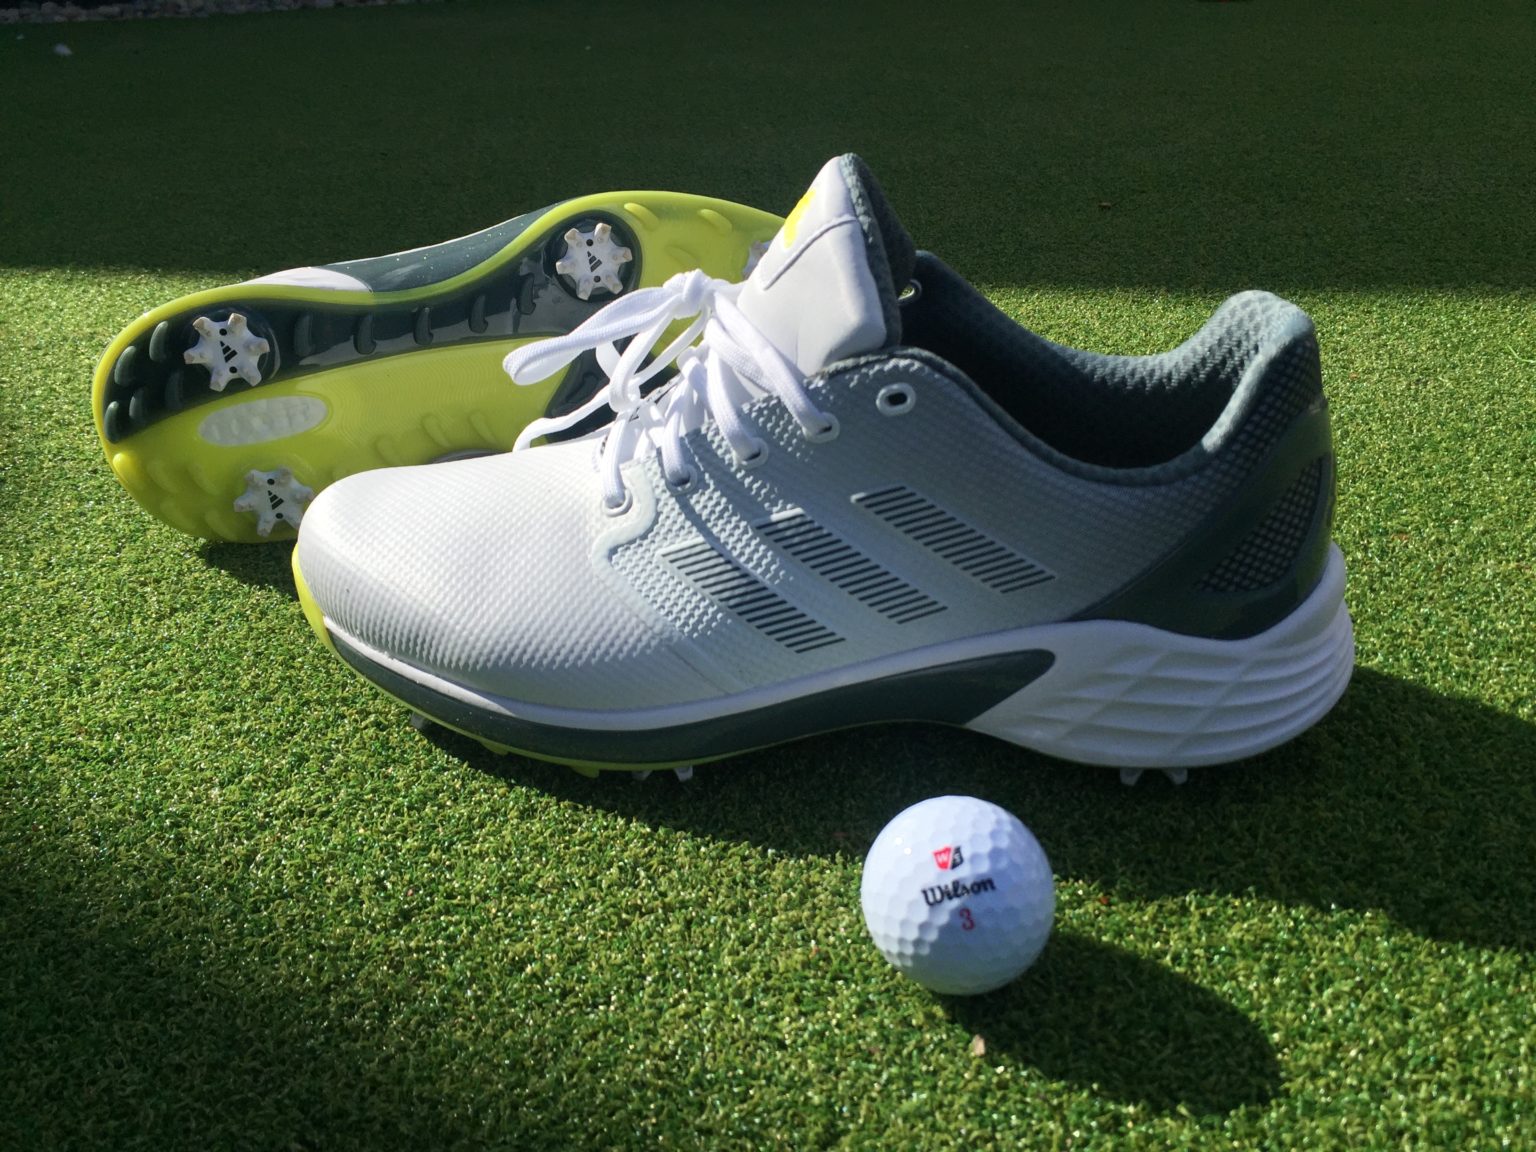 Top 5 Best Golf Shoes for Men in 2022